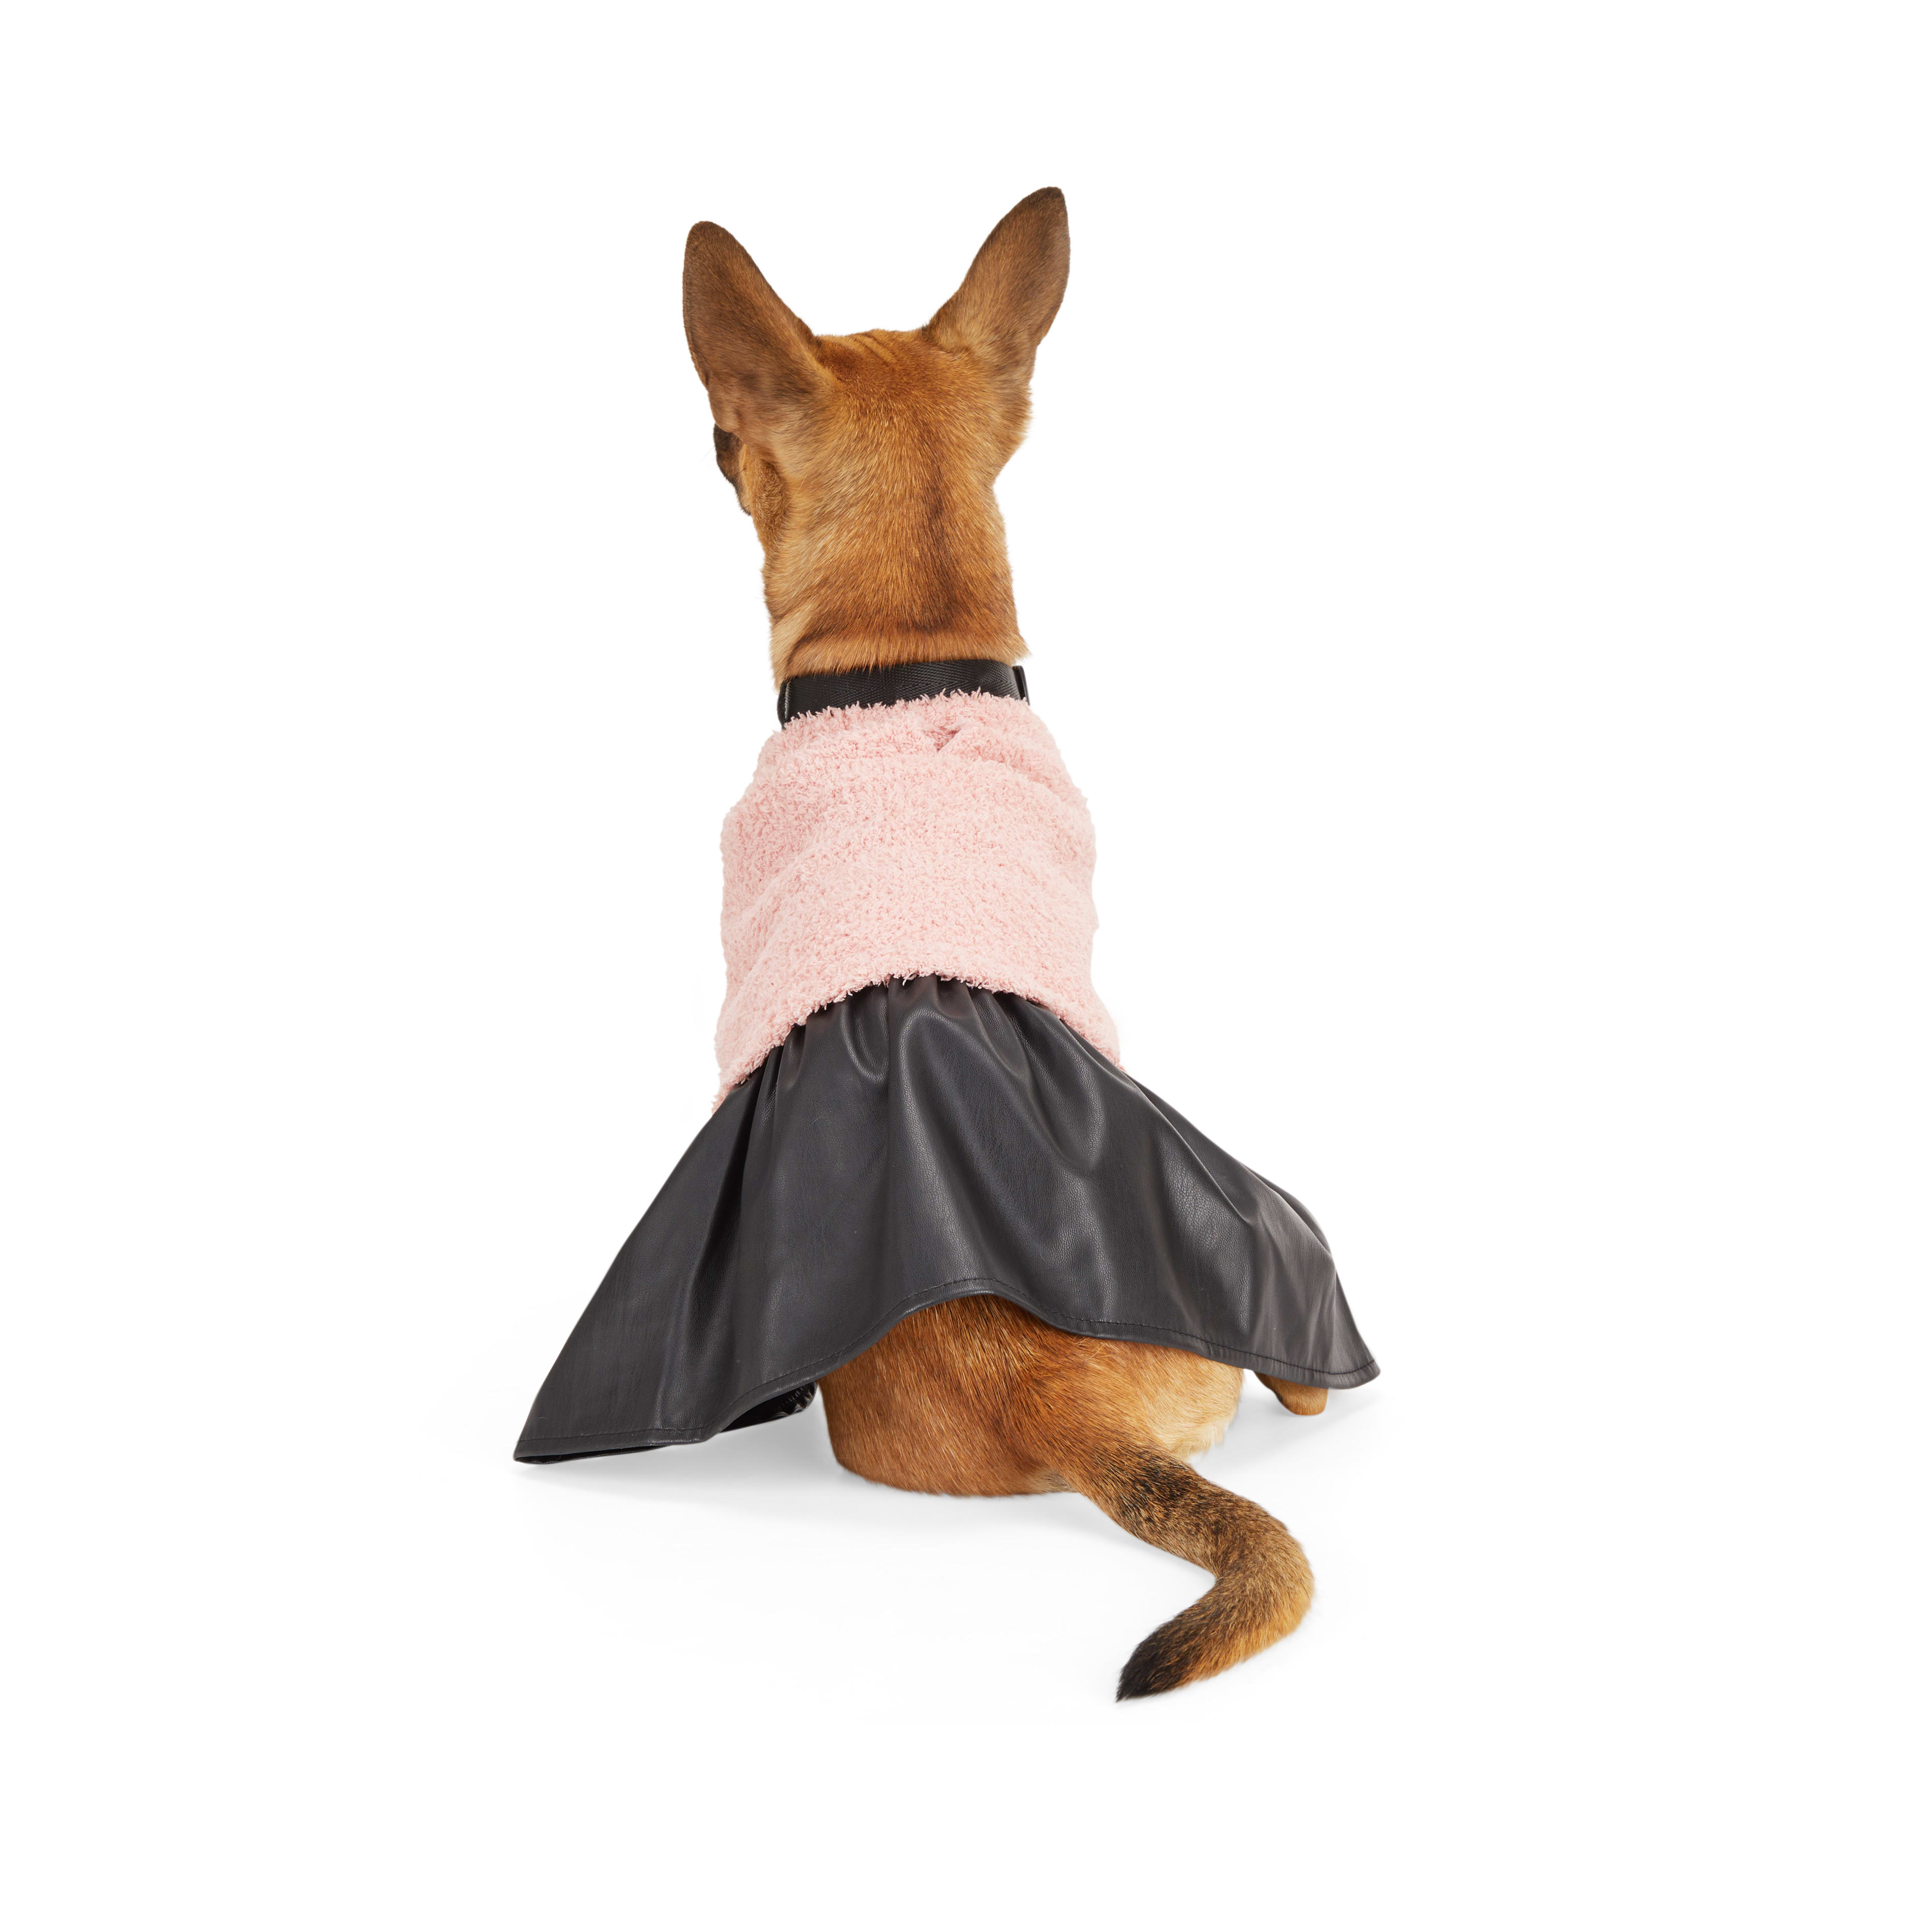 Cat Dog Dress Clothes For Small Dogs Luxury Sweater Skirt Puppy